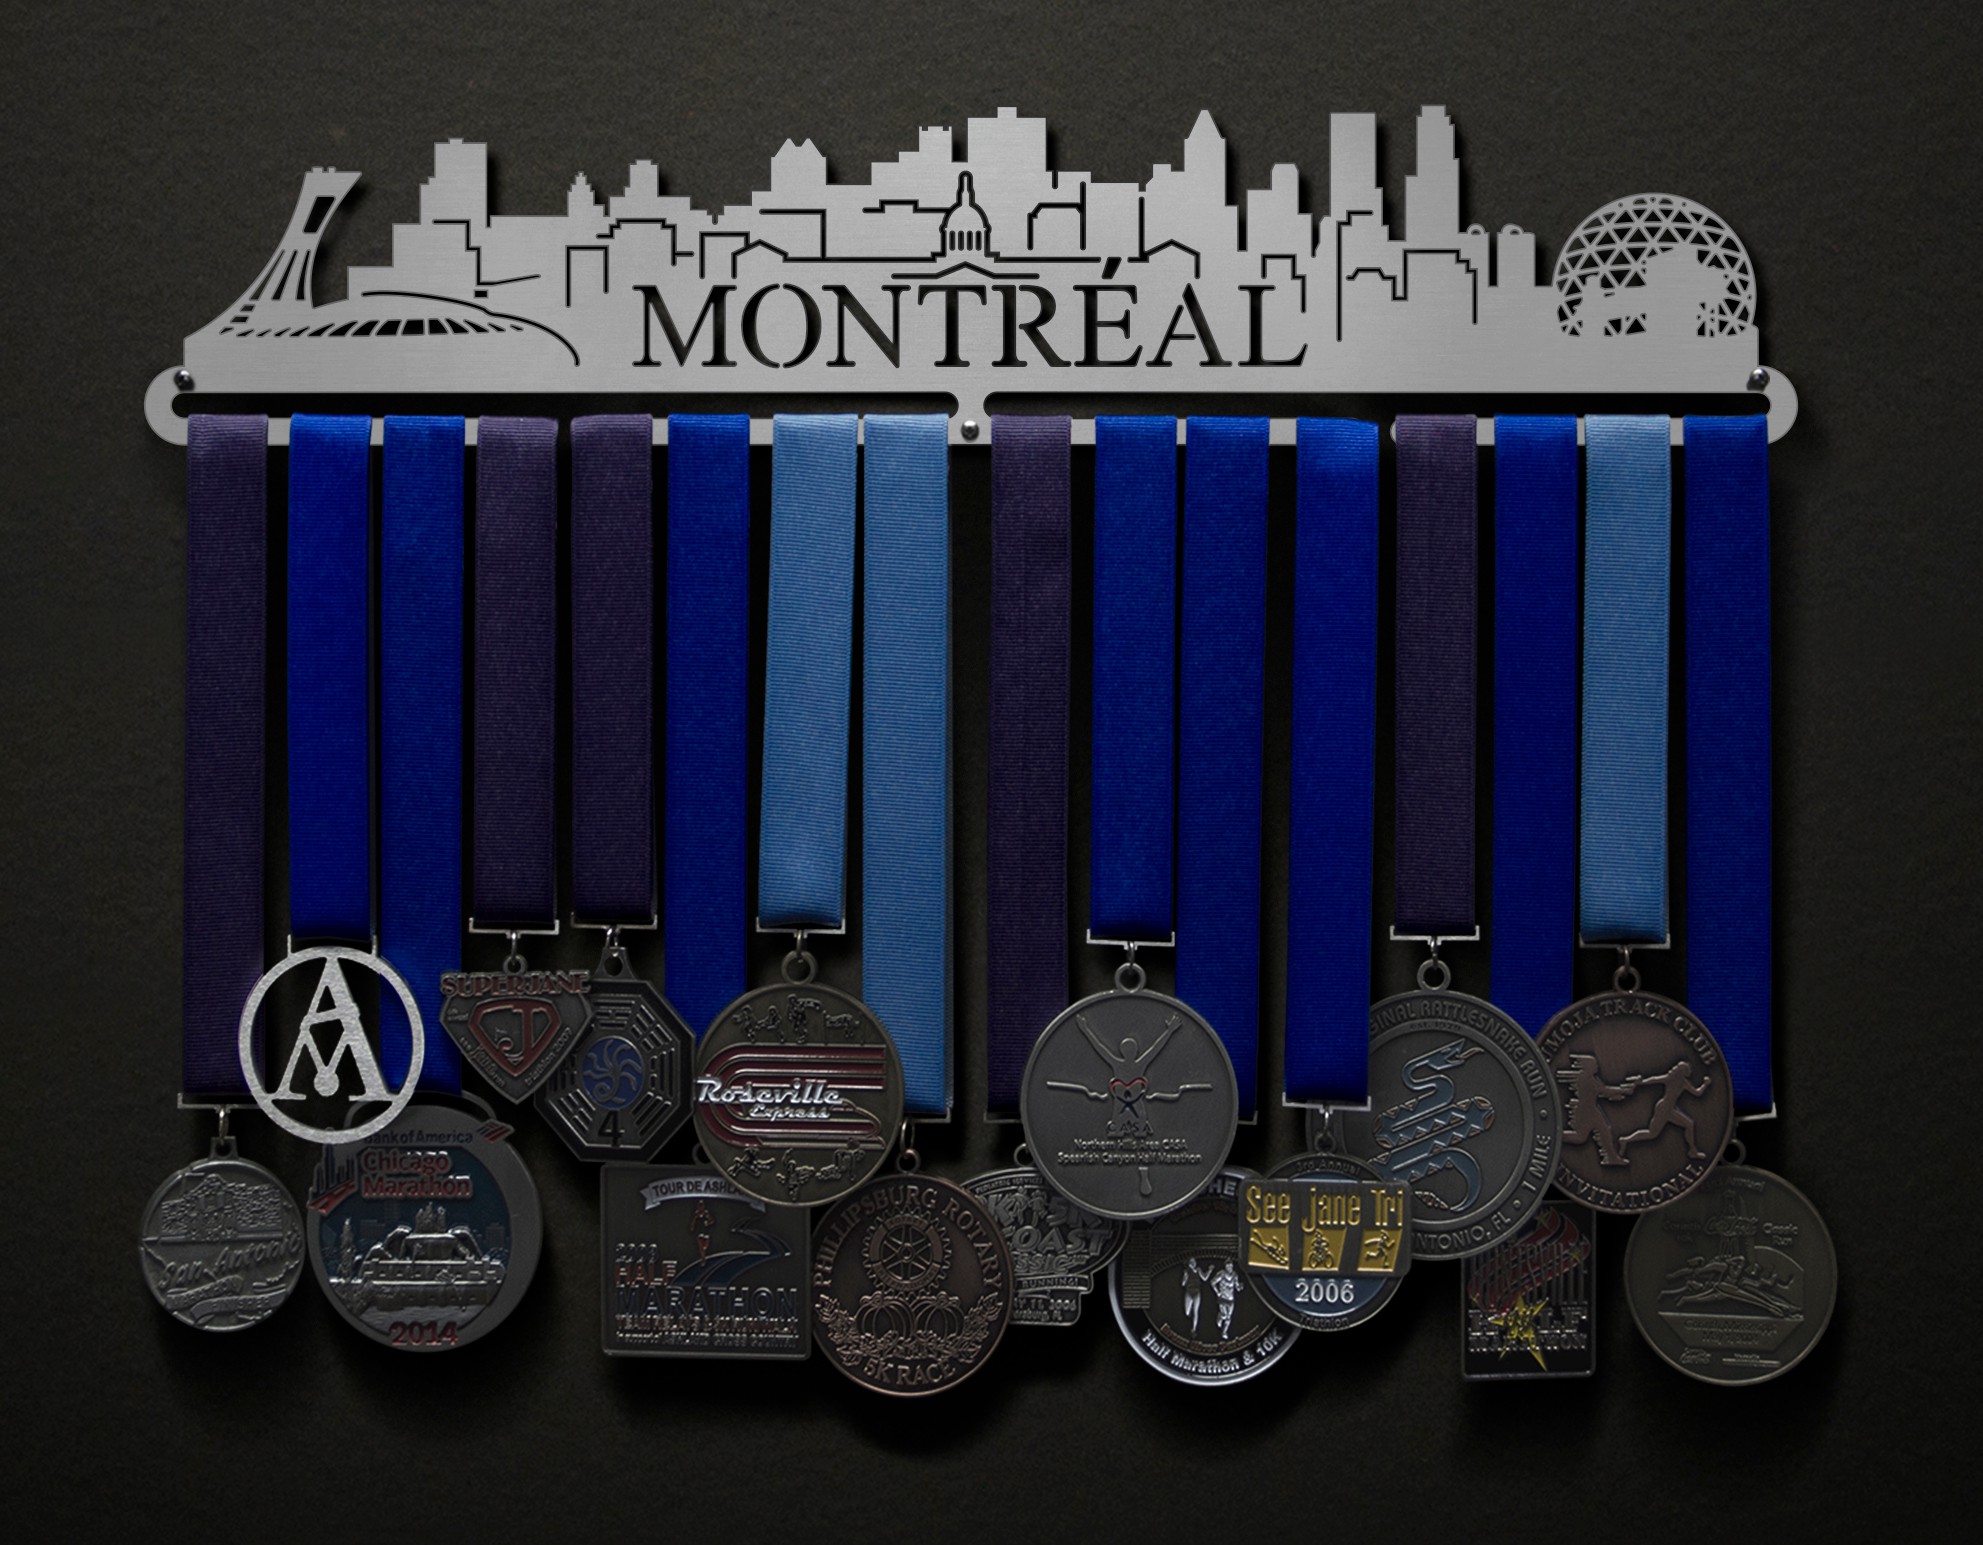 Montreal Cityscape Sport And Running Medal Displays The Original